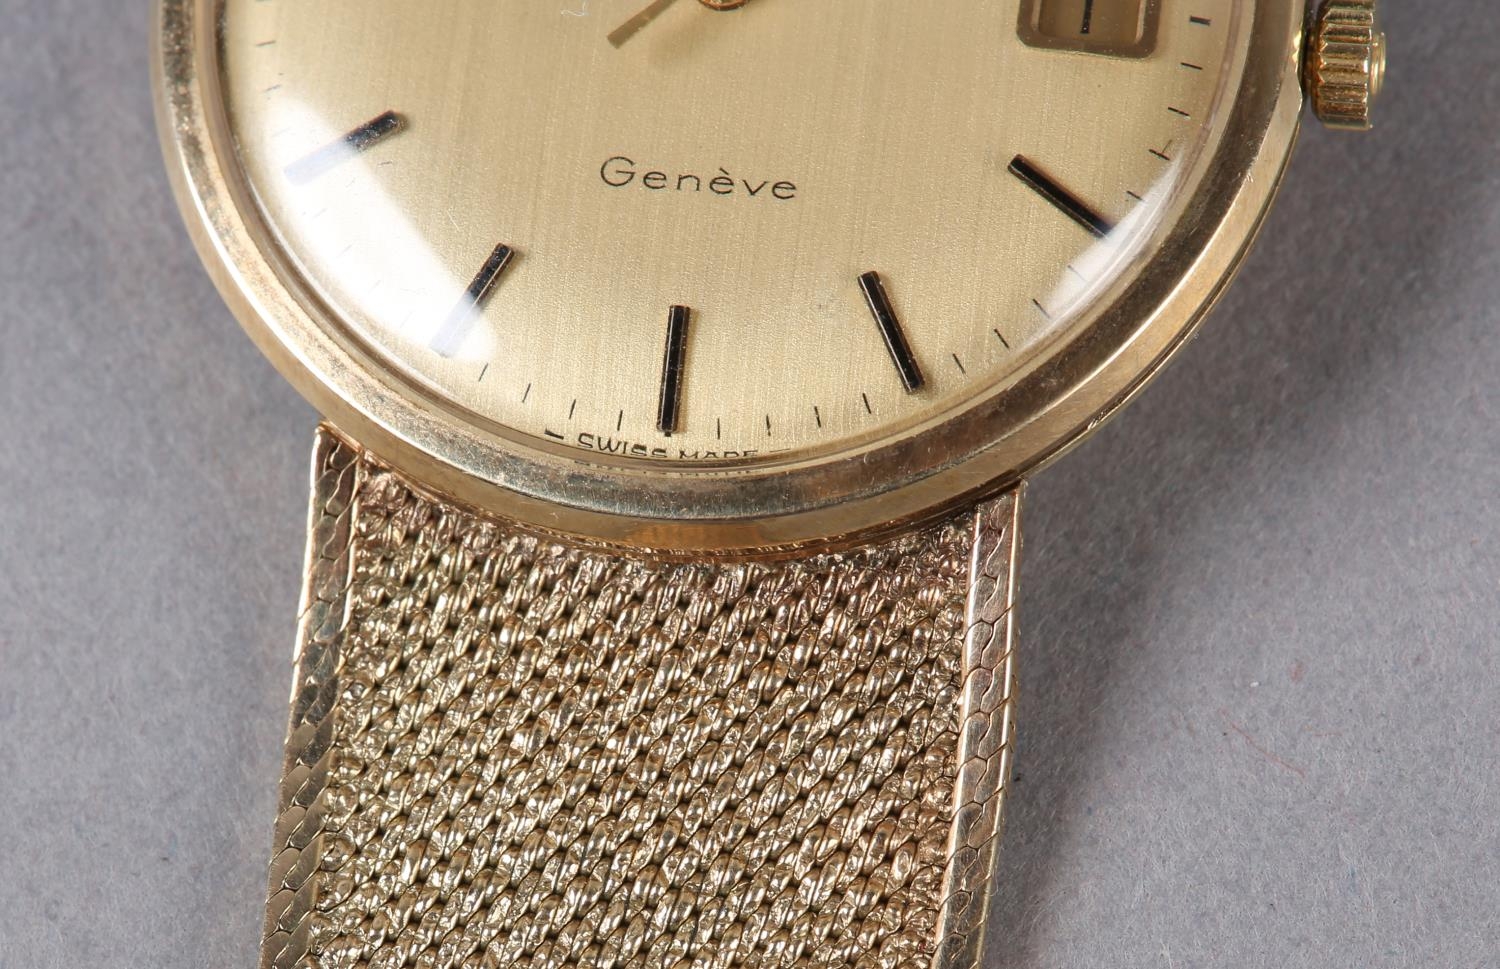 AN OMEGA GENTLEMAN'S GENÈVE MANUAL DATE WRISTWATCH, c1971, in 9ct gold case, jewelled lever date - Image 3 of 4